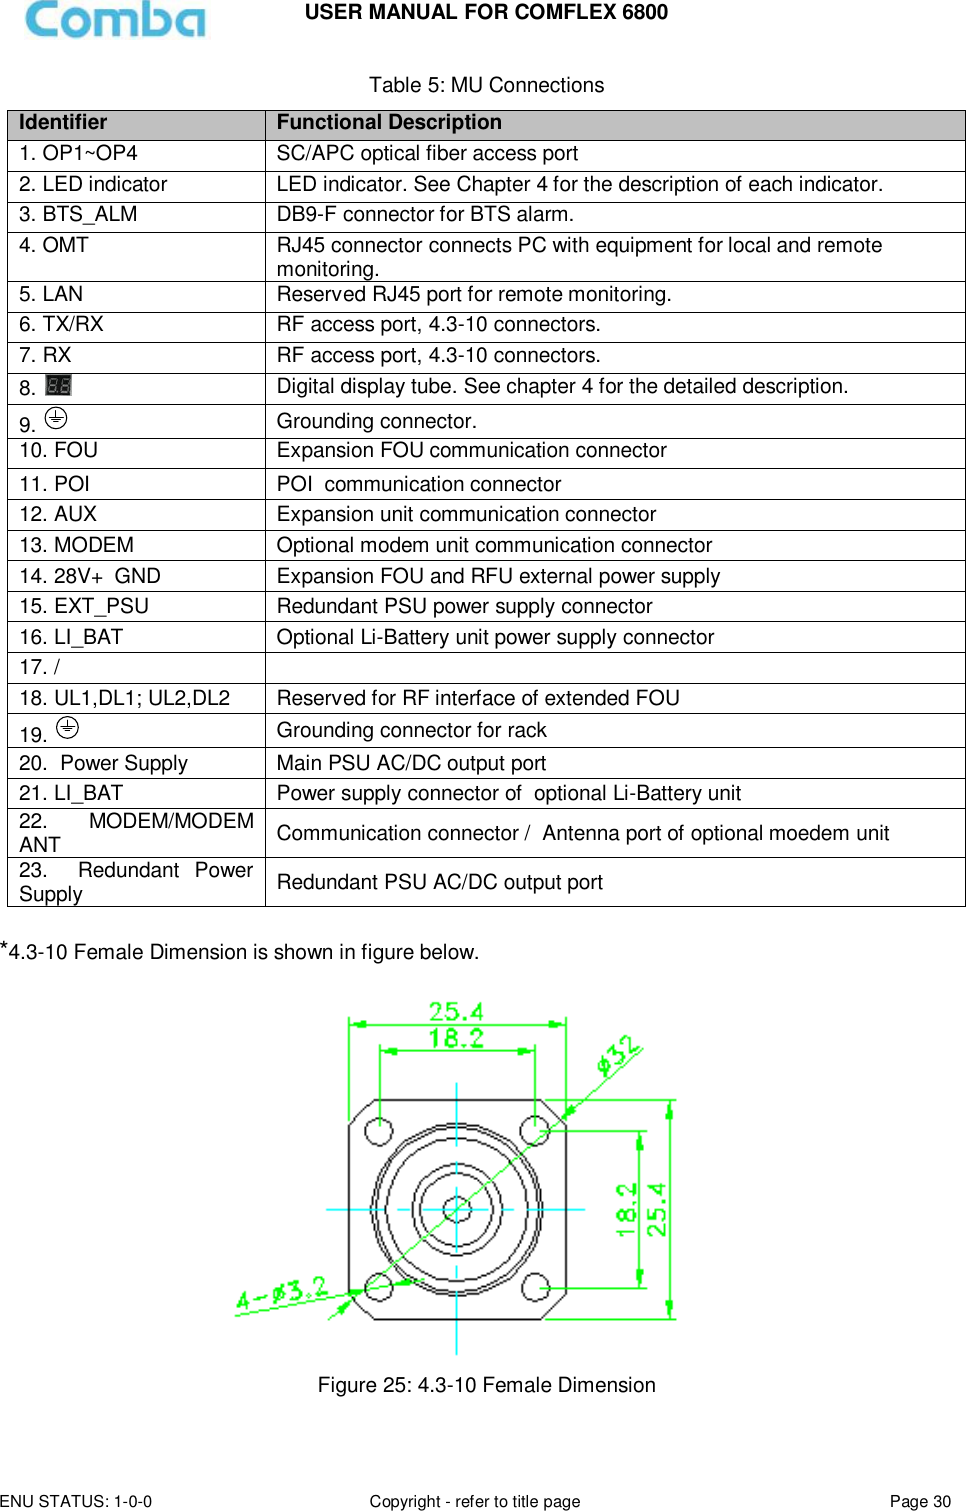 USER MANUAL FOR COMFLEX 6800 ENU STATUS: 1-0-0 Copyright - refer to title page Page 30  Table 5: MU Connections Identifier Functional Description 1. OP1~OP4 SC/APC optical fiber access port 2. LED indicator LED indicator. See Chapter 4 for the description of each indicator.  3. BTS_ALM DB9-F connector for BTS alarm. 4. OMT RJ45 connector connects PC with equipment for local and remote monitoring. 5. LAN Reserved RJ45 port for remote monitoring. 6. TX/RX RF access port, 4.3-10 connectors. 7. RX RF access port, 4.3-10 connectors. 8.   Digital display tube. See chapter 4 for the detailed description. 9.   Grounding connector. 10. FOU Expansion FOU communication connector 11. POI POI  communication connector 12. AUX Expansion unit communication connector 13. MODEM Optional modem unit communication connector 14. 28V+  GND Expansion FOU and RFU external power supply 15. EXT_PSU Redundant PSU power supply connector 16. LI_BAT Optional Li-Battery unit power supply connector 17. /  18. UL1,DL1; UL2,DL2 Reserved for RF interface of extended FOU 19.   Grounding connector for rack 20.  Power Supply  Main PSU AC/DC output port 21. LI_BAT Power supply connector of  optional Li-Battery unit 22.    MODEM/MODEM       ANT Communication connector /  Antenna port of optional moedem unit 23.    Redundant  Power Supply Redundant PSU AC/DC output port  *4.3-10 Female Dimension is shown in figure below.                      Figure 25: 4.3-10 Female Dimension  